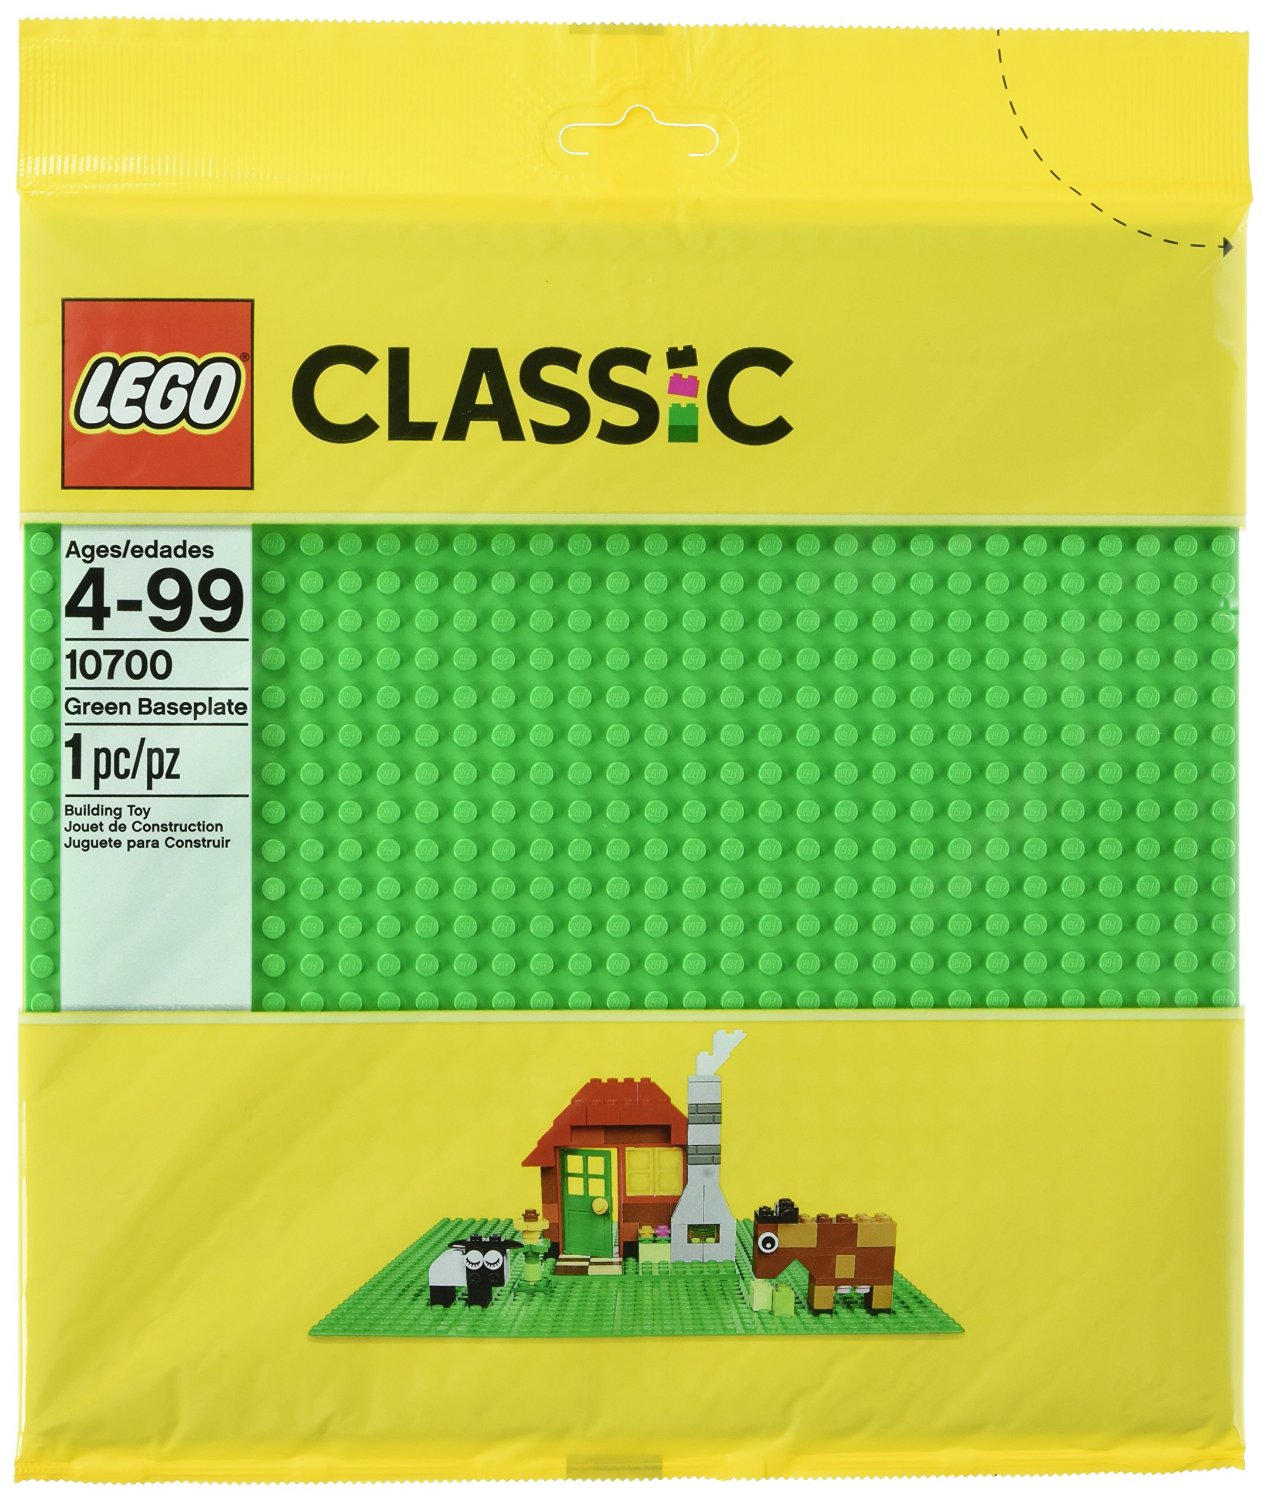 Lego gifts